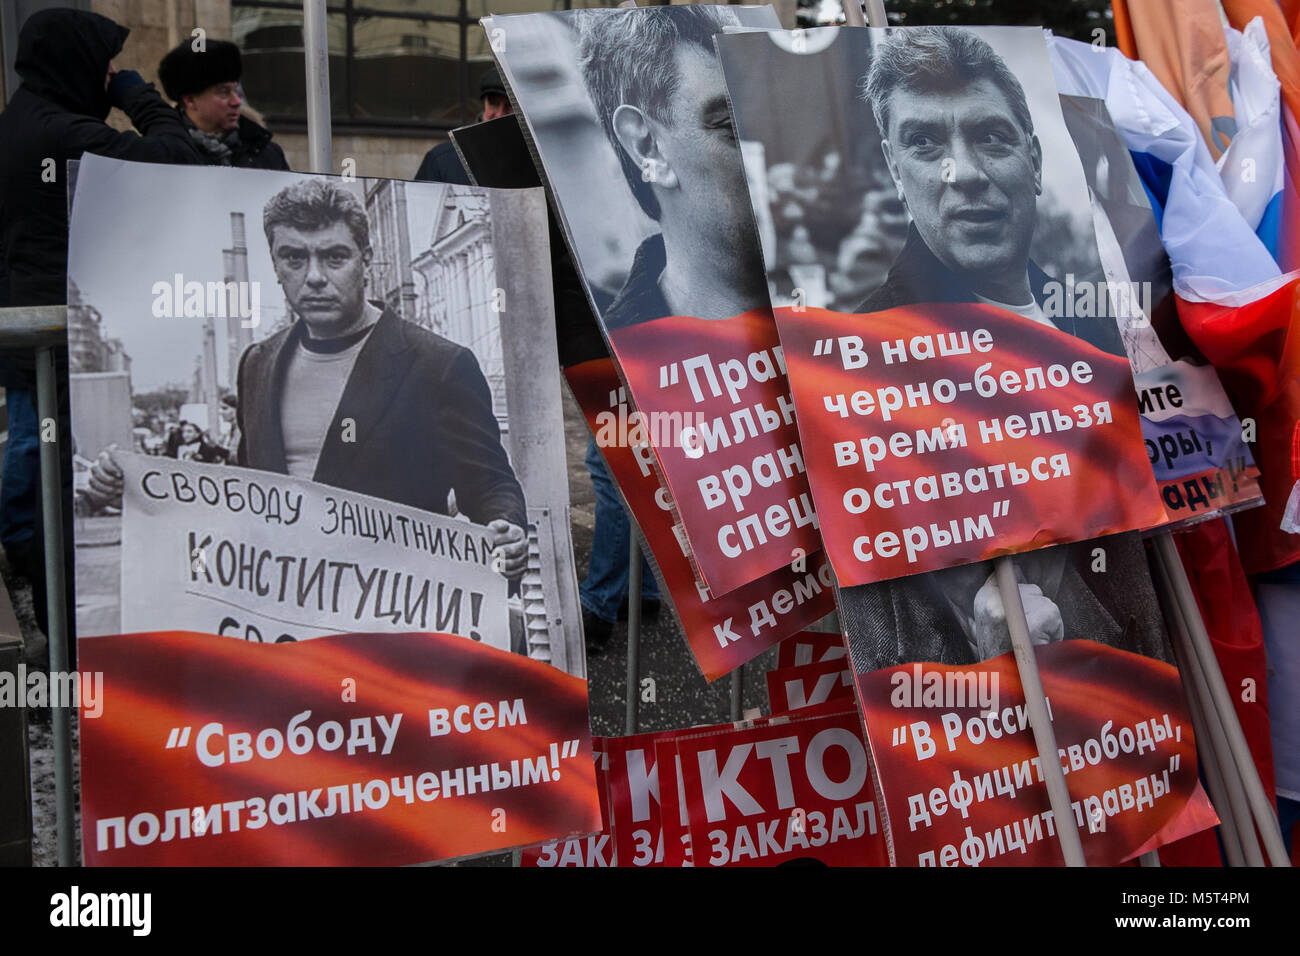 Moscow, Russia. 25th February 2018. Posters seen during a march in Moscow's Prospekt Akademika Sakharova Street in memory of Russian politician and opposition leader Boris Nemtsov on the eve of the 3rd anniversary of his death. Boris Nemtsov was shot dead on Bolshoi Moskvoretsky Bridge in the evening of February 27, 2015. Credit: Victor Vytolskiy/Alamy Live News Stock Photo